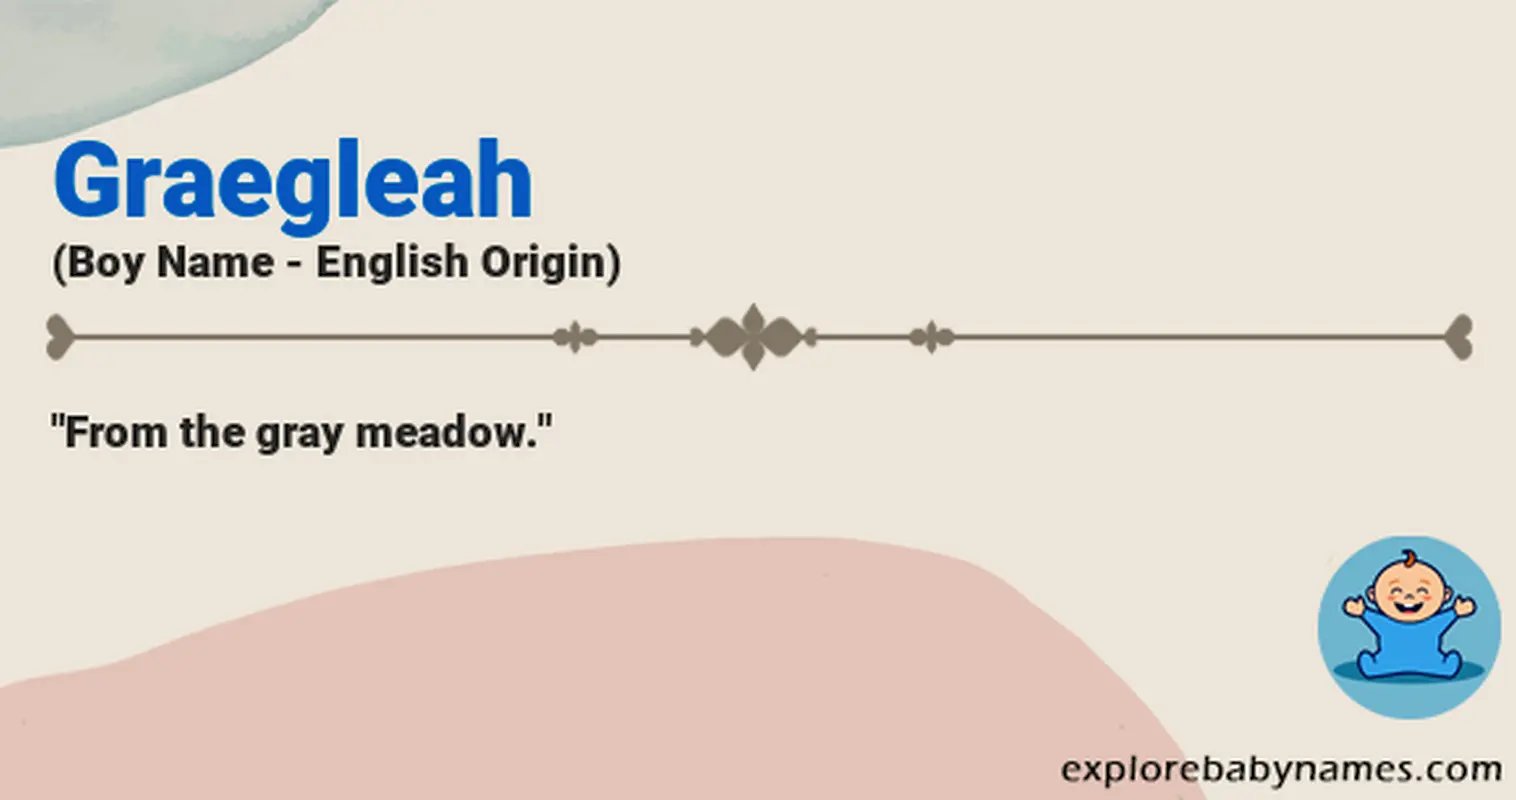 Meaning of Graegleah